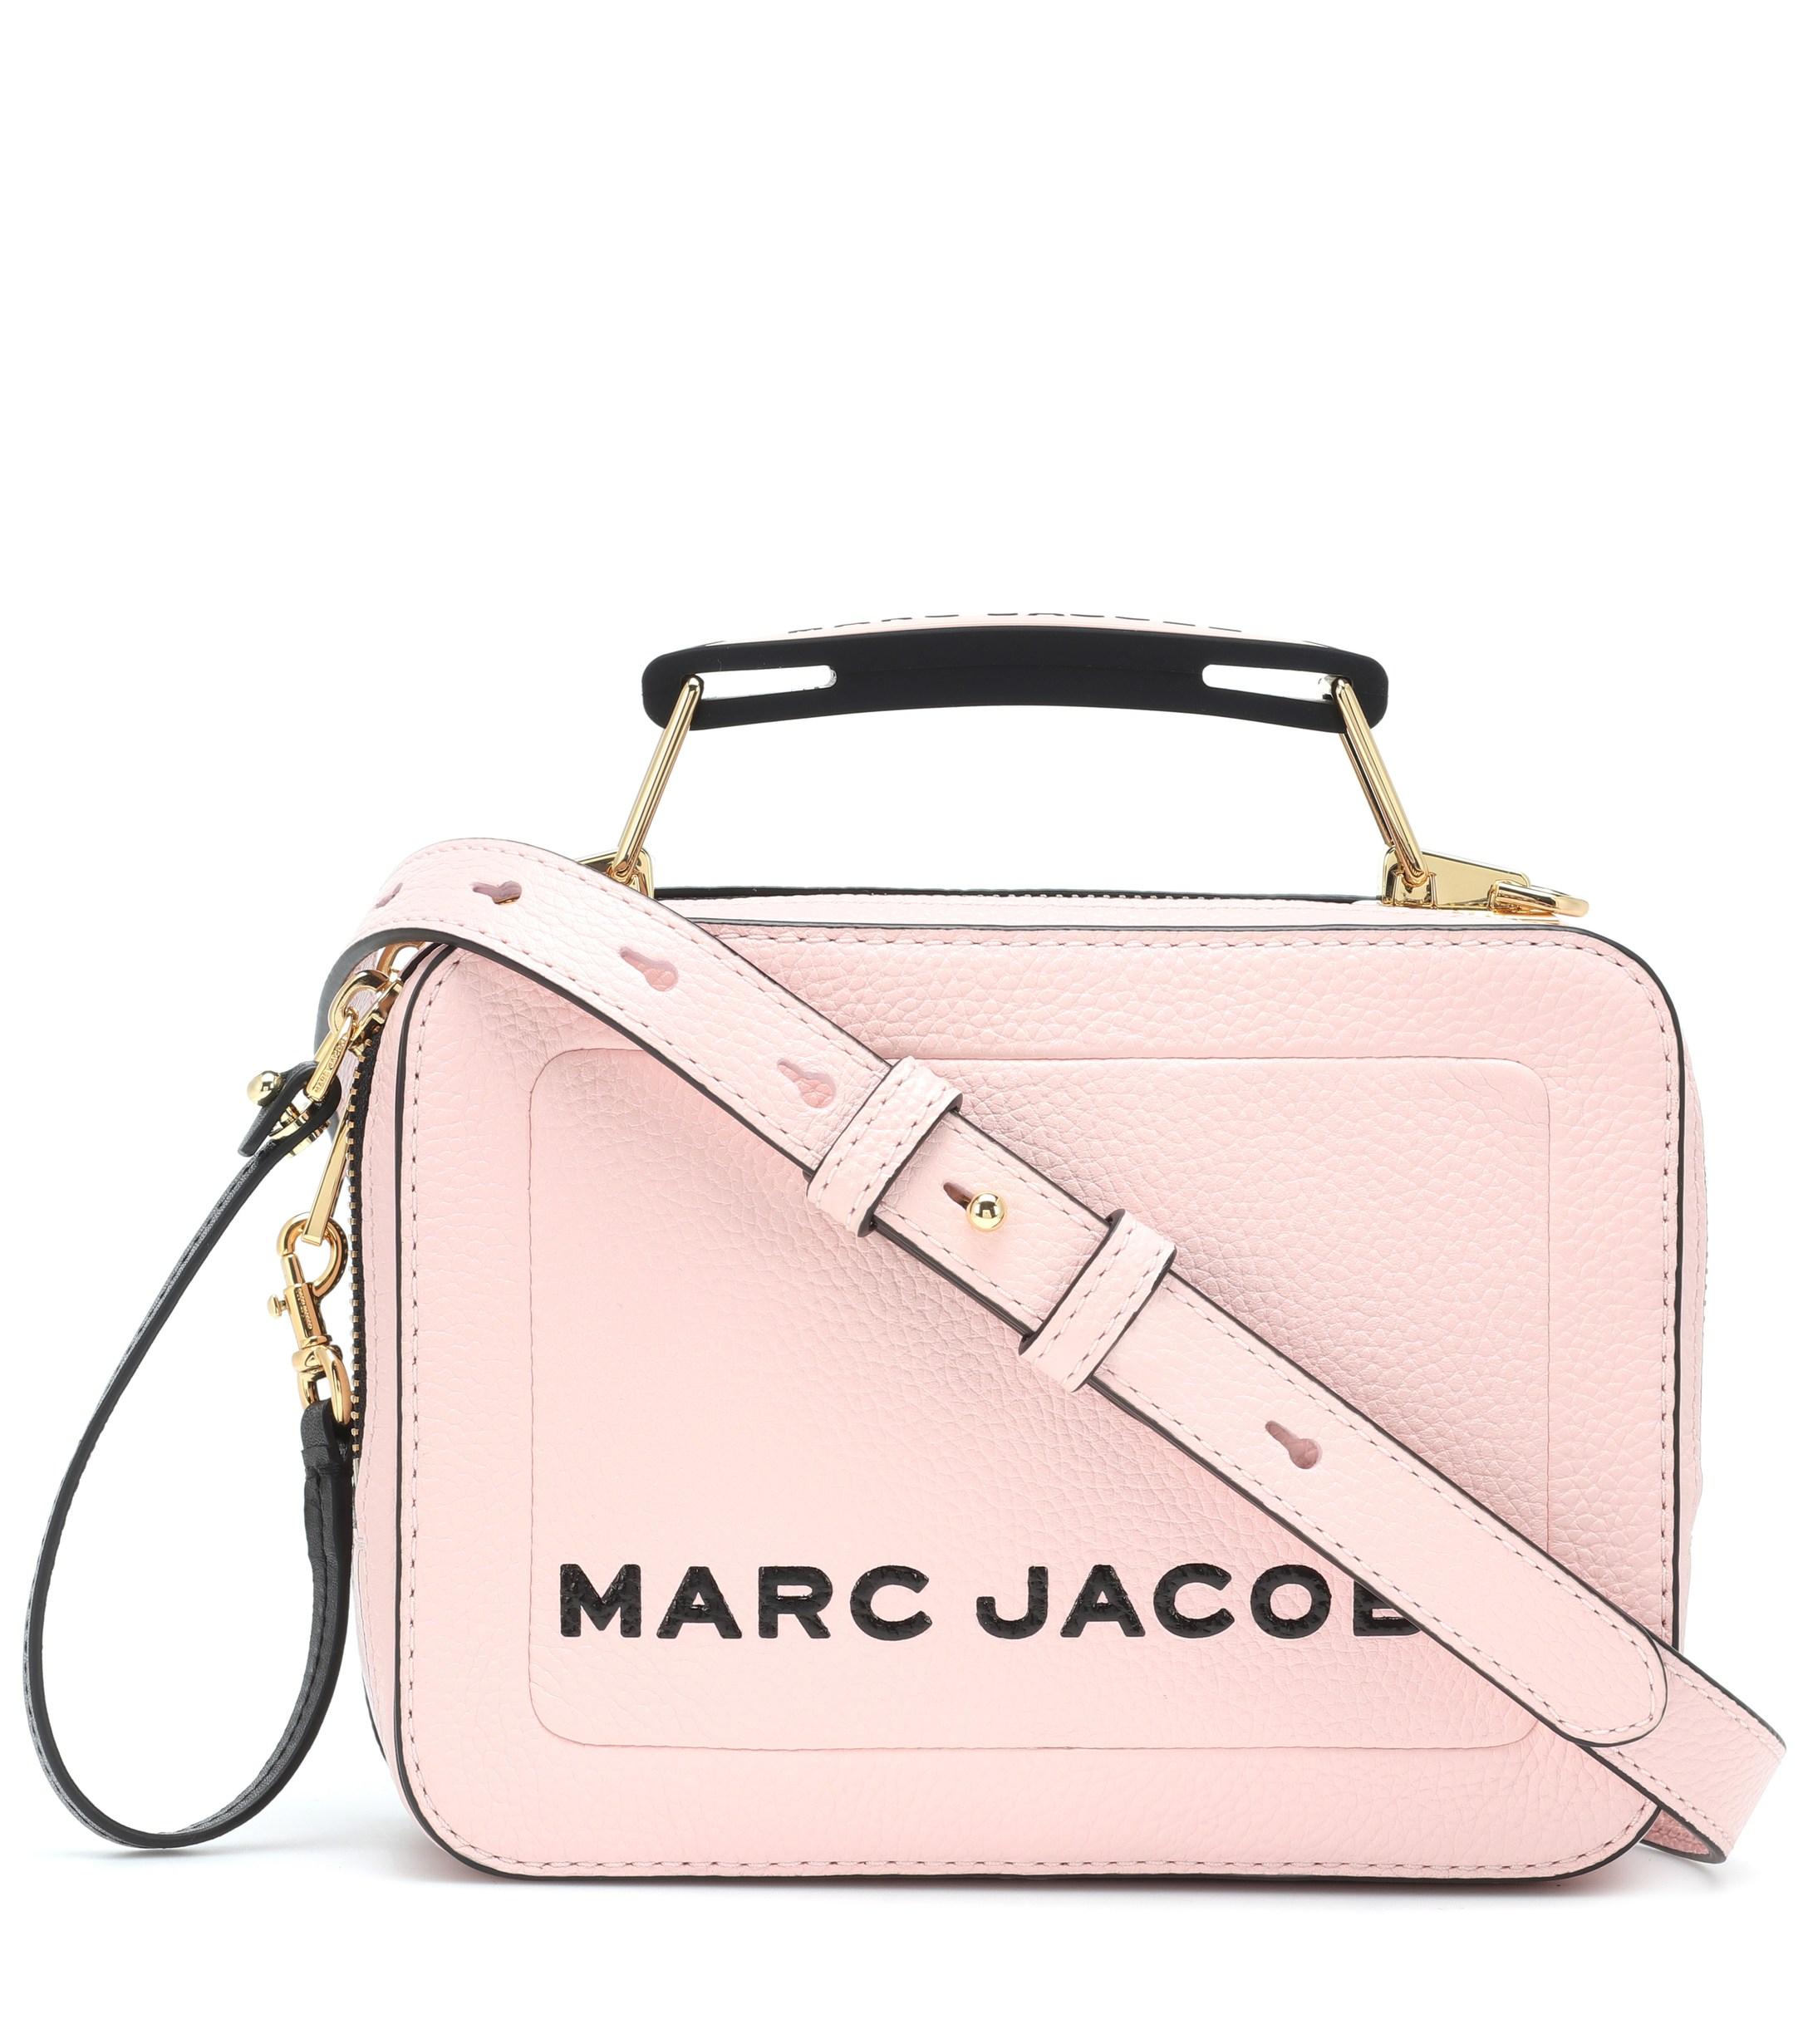 Marc Jacobs Leather The Mini Box Shoulder Bag in Blush (Pink) - Lyst